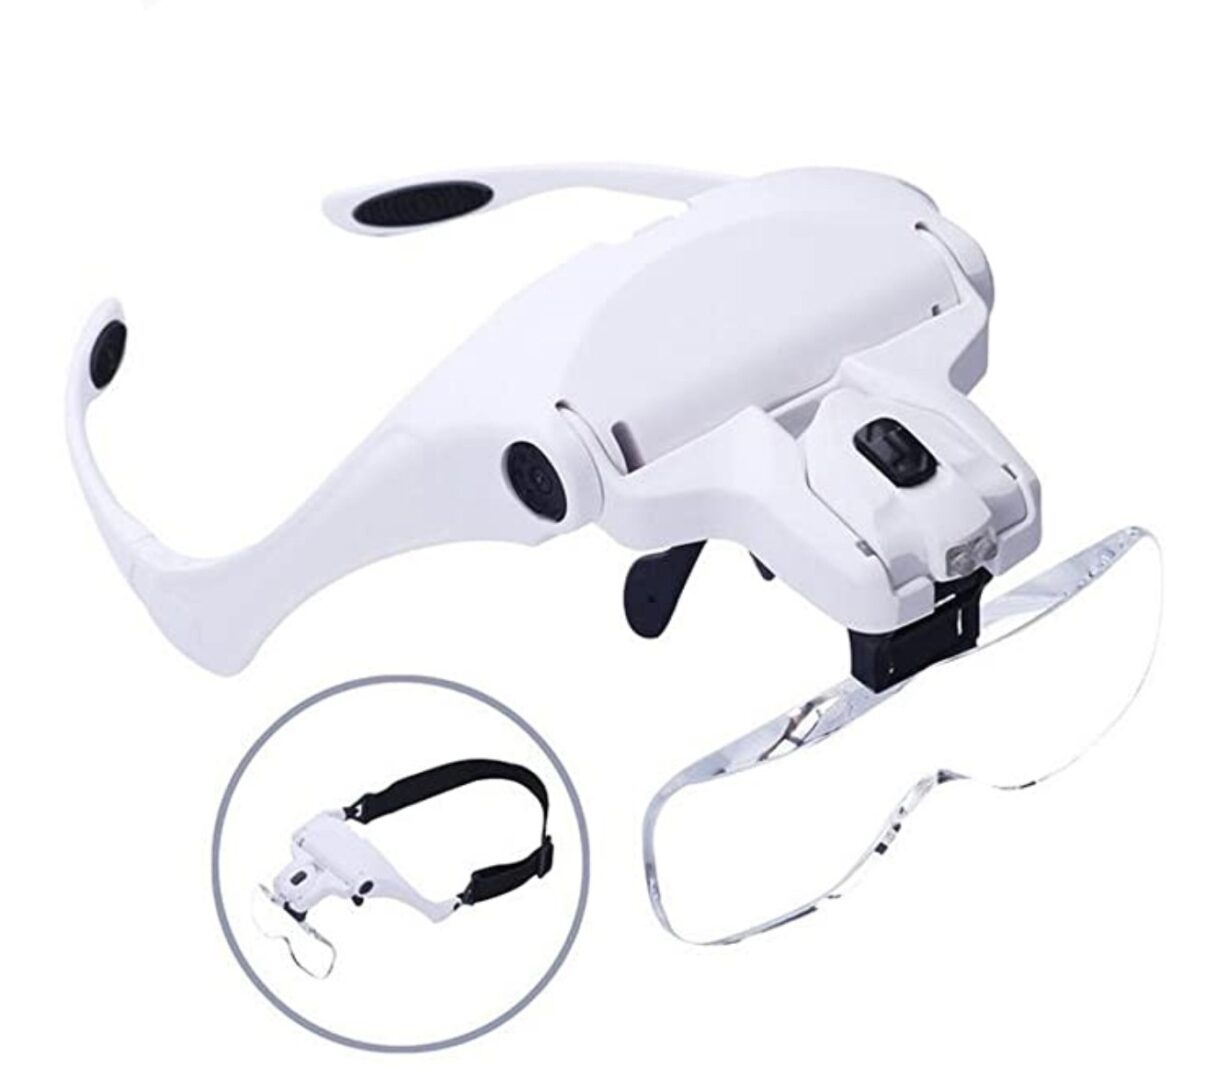 Magnifier Glasses with LED light.jpeg